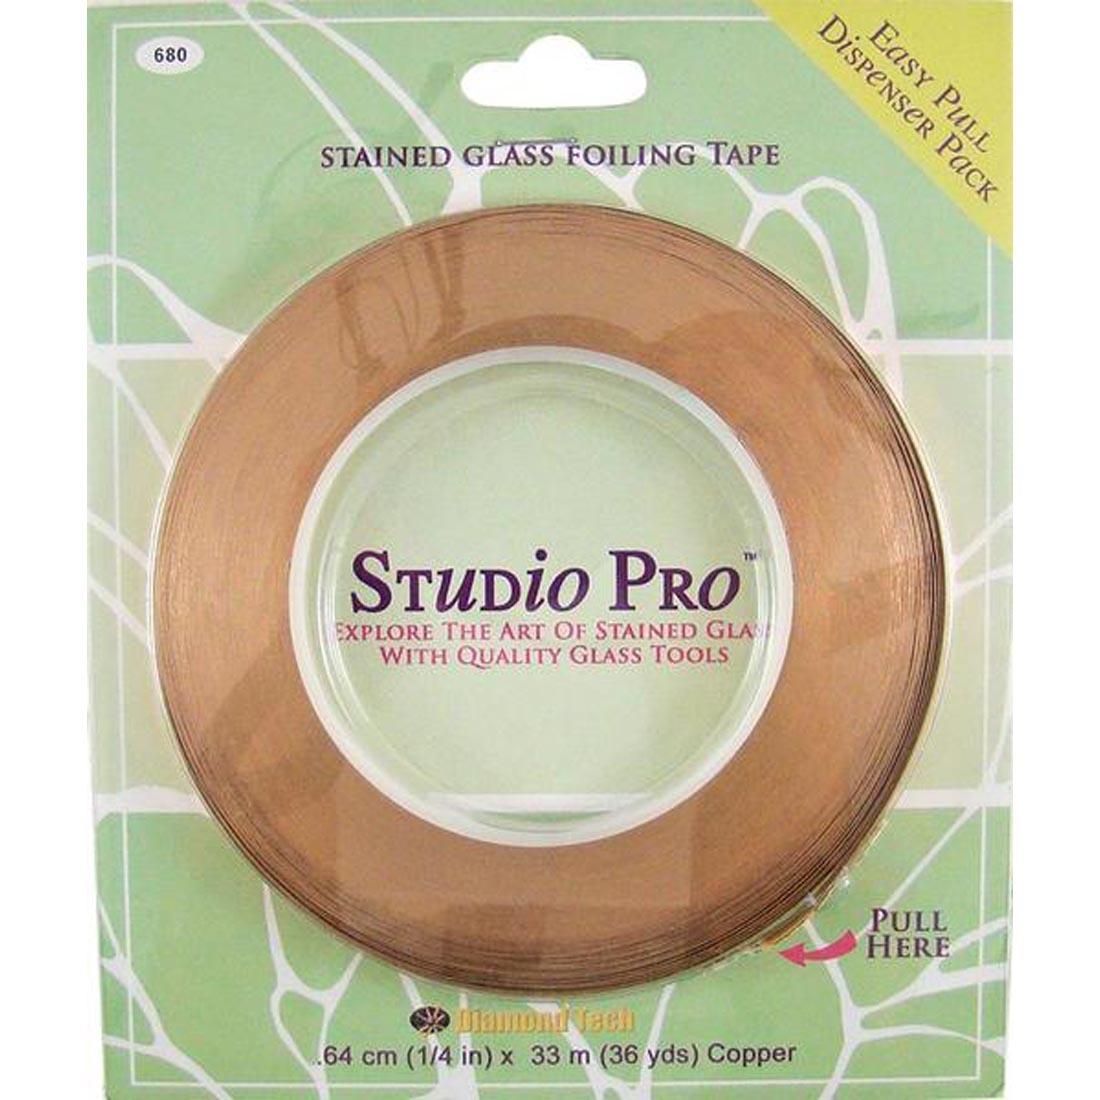 Package of Studio Pro Copper Stained Glass Foiling Tape